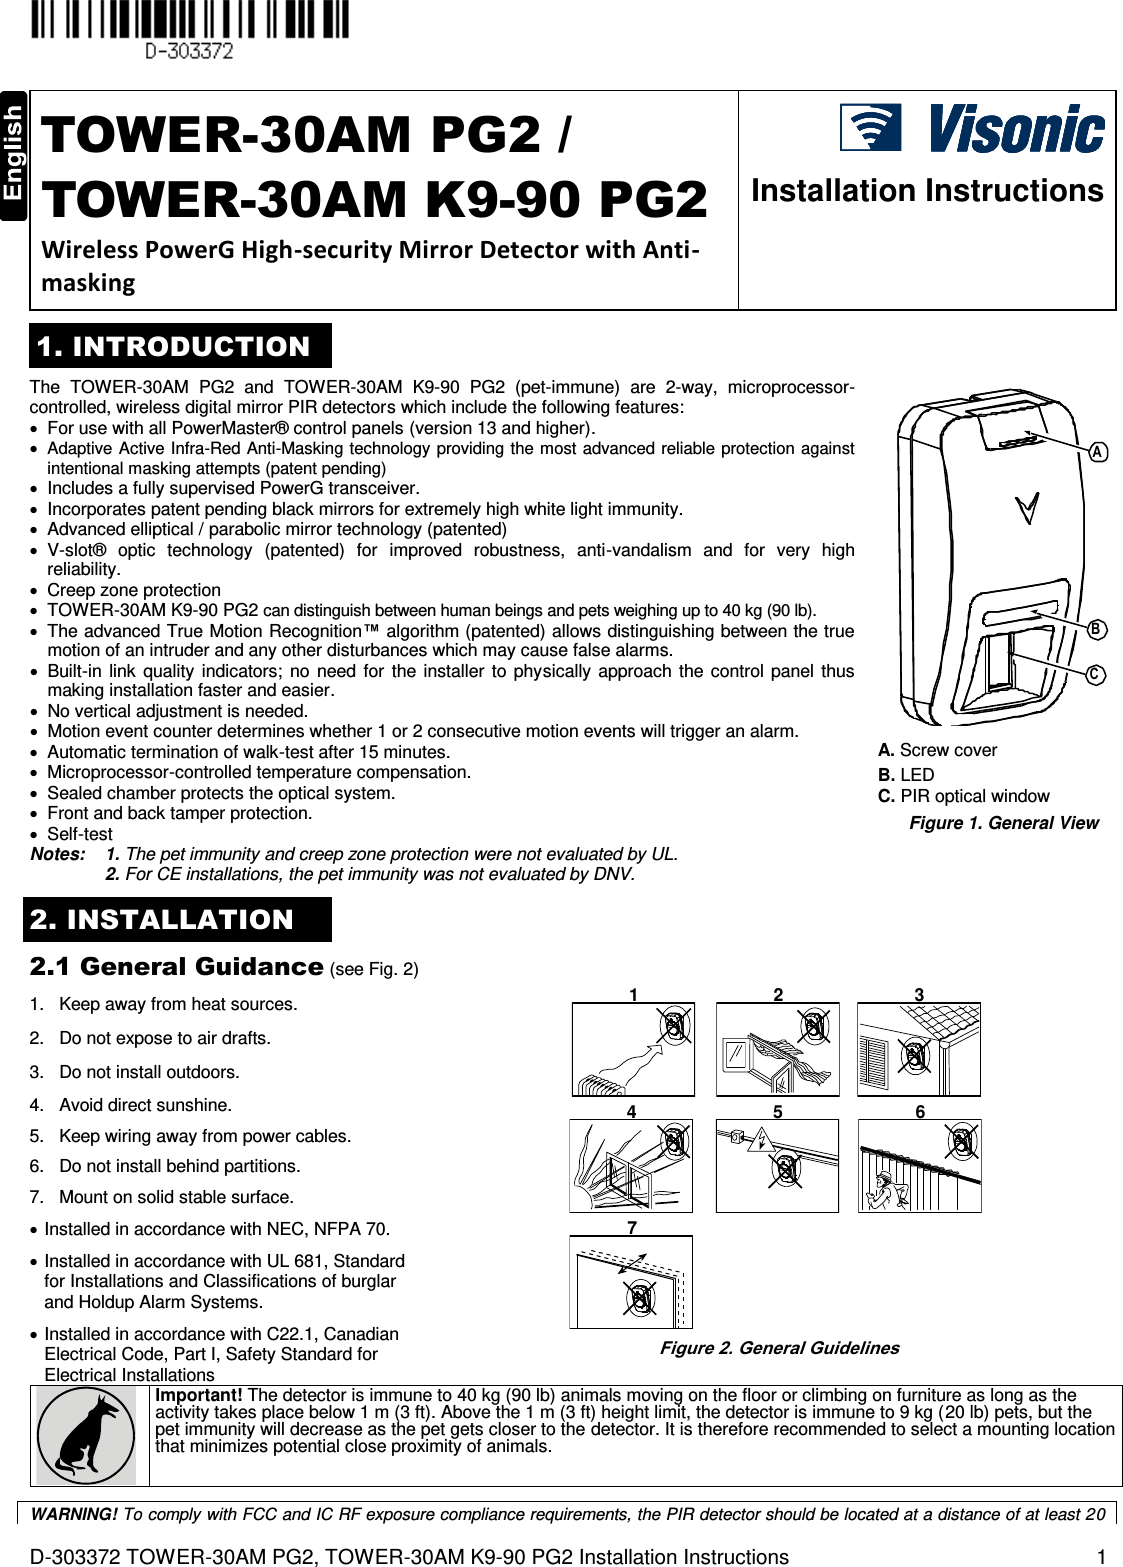  D-303372 TOWER-30AM PG2, TOWER-30AM K9-90 PG2 Installation Instructions  1  TOWER-30AM PG2 / TOWER-30AM K9-90 PG2 Wireless PowerG High-security Mirror Detector with Anti-masking  Installation Instructions 1. INTRODUCTION The  TOWER-30AM  PG2  and  TOWER-30AM K9-90  PG2  (pet-immune)  are  2-way,  microprocessor-controlled, wireless digital mirror PIR detectors which include the following features:   For use with all PowerMaster® control panels (version 13 and higher).  Adaptive Active Infra-Red Anti-Masking technology providing the most advanced reliable protection against intentional masking attempts (patent pending)   Includes a fully supervised PowerG transceiver.   Incorporates patent pending black mirrors for extremely high white light immunity.   Advanced elliptical / parabolic mirror technology (patented)   V-slot®  optic  technology  (patented)  for  improved  robustness,  anti-vandalism  and  for  very  high reliability.   Creep zone protection   TOWER-30AM K9-90 PG2 can distinguish between human beings and pets weighing up to 40 kg (90 lb).   The advanced True Motion Recognition™  algorithm (patented) allows distinguishing between the true motion of an intruder and any other disturbances which may cause false alarms.   Built-in  link  quality  indicators;  no  need  for  the  installer  to  physically  approach the  control  panel  thus making installation faster and easier.   No vertical adjustment is needed.   Motion event counter determines whether 1 or 2 consecutive motion events will trigger an alarm.   Automatic termination of walk-test after 15 minutes.   Microprocessor-controlled temperature compensation.   Sealed chamber protects the optical system.   Front and back tamper protection.   Self-test Notes: 1. The pet immunity and creep zone protection were not evaluated by UL.  2. For CE installations, the pet immunity was not evaluated by DNV. CBA A. Screw cover B. LED  C. PIR optical window Figure 1. General View 2. INSTALLATION 2.1 General Guidance (see Fig. 2) 1.  Keep away from heat sources. 2.   Do not expose to air drafts. 3.   Do not install outdoors. 4.   Avoid direct sunshine. 5.   Keep wiring away from power cables. 6.   Do not install behind partitions. 7.   Mount on solid stable surface.  Installed in accordance with NEC, NFPA 70.  Installed in accordance with UL 681, Standard for Installations and Classifications of burglar and Holdup Alarm Systems.  Installed in accordance with C22.1, Canadian Electrical Code, Part I, Safety Standard for Electrical Installations 1 2 34 5 67 Figure 2. General Guidelines  Important! The detector is immune to 40 kg (90 lb) animals moving on the floor or climbing on furniture as long as the activity takes place below 1 m (3 ft). Above the 1 m (3 ft) height limit, the detector is immune to 9 kg (20 lb) pets, but the pet immunity will decrease as the pet gets closer to the detector. It is therefore recommended to select a mounting location that minimizes potential close proximity of animals.    WARNING! To comply with FCC and IC RF exposure compliance requirements, the PIR detector should be located at a distance of at least 20 